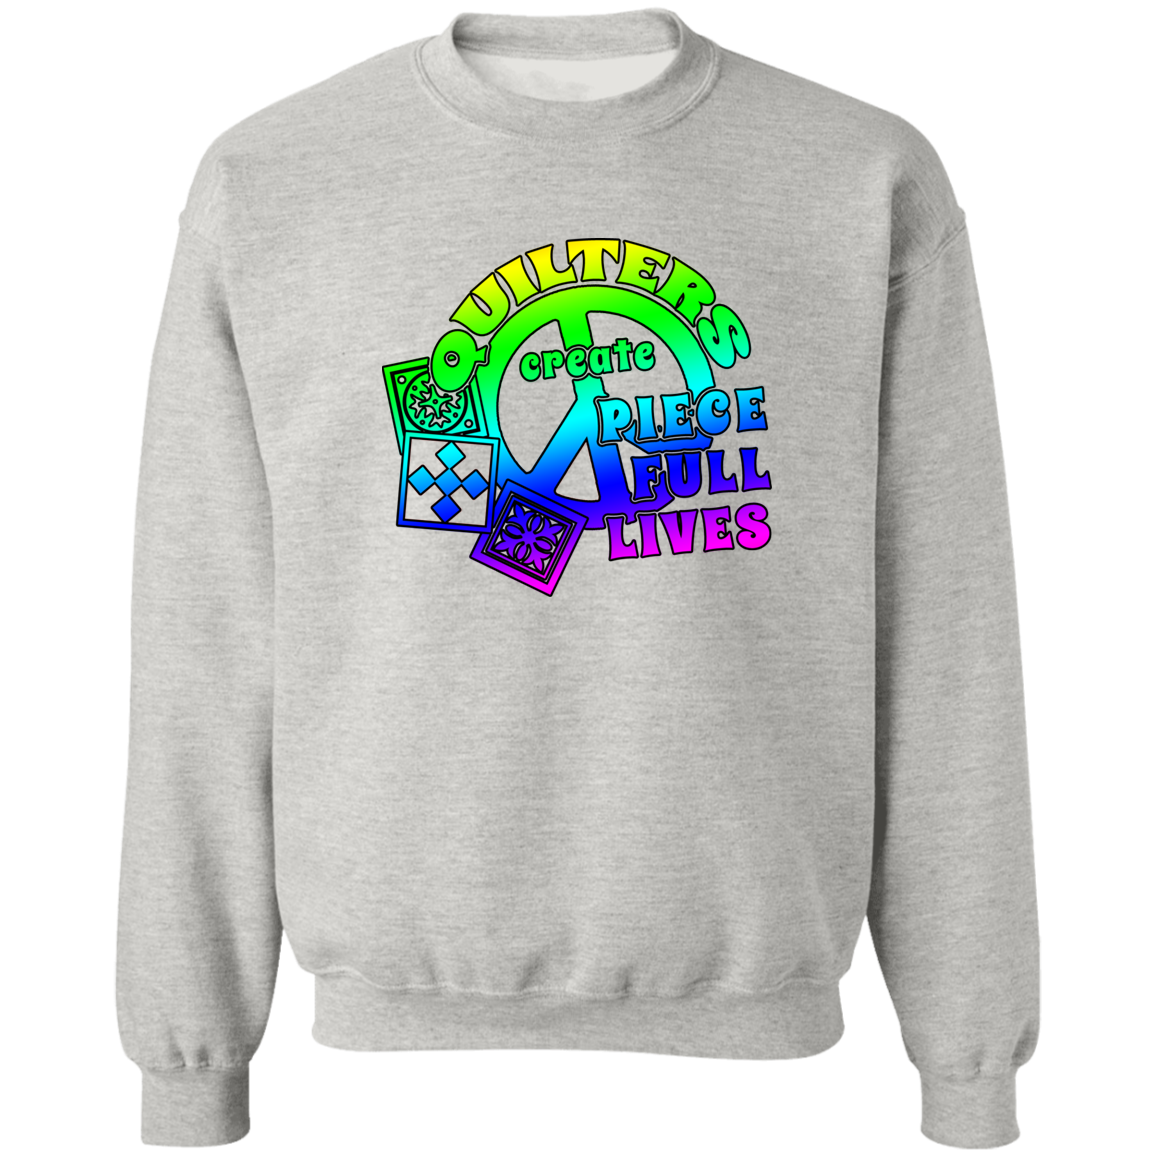 Quilters Create Pieceful Lives Sweatshirt